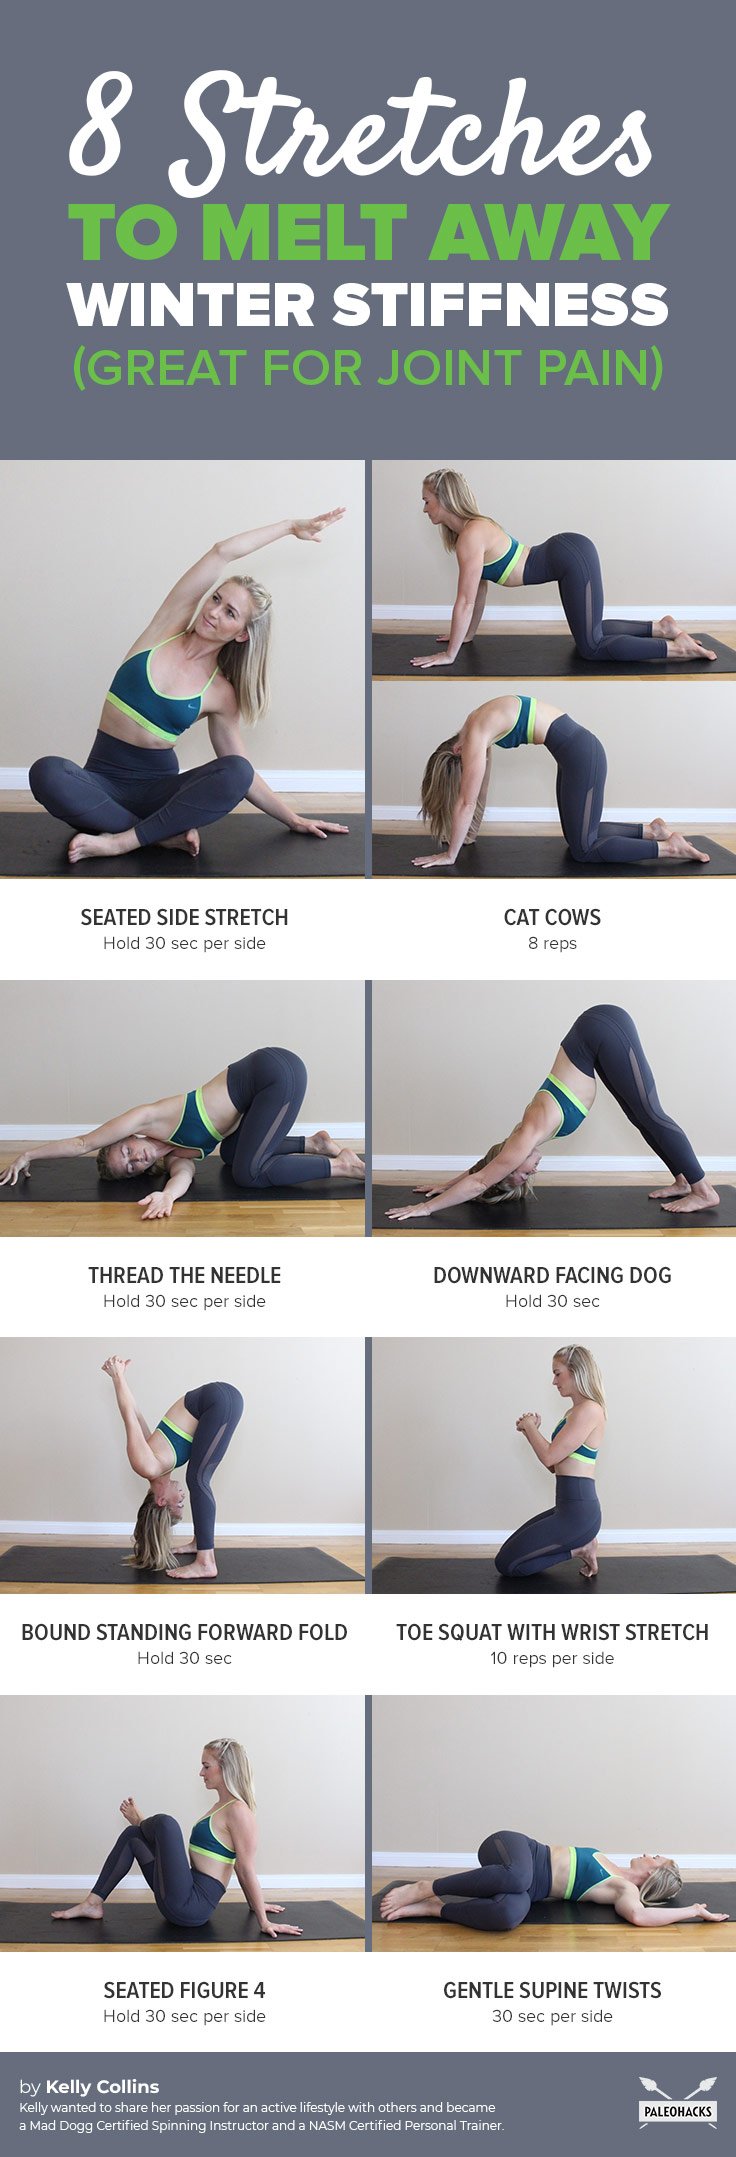 Does your joint pain and stiffness seem to get worse with bad weather? If you are feeling stiff this winter, use these eight easy stretches to loosen up.